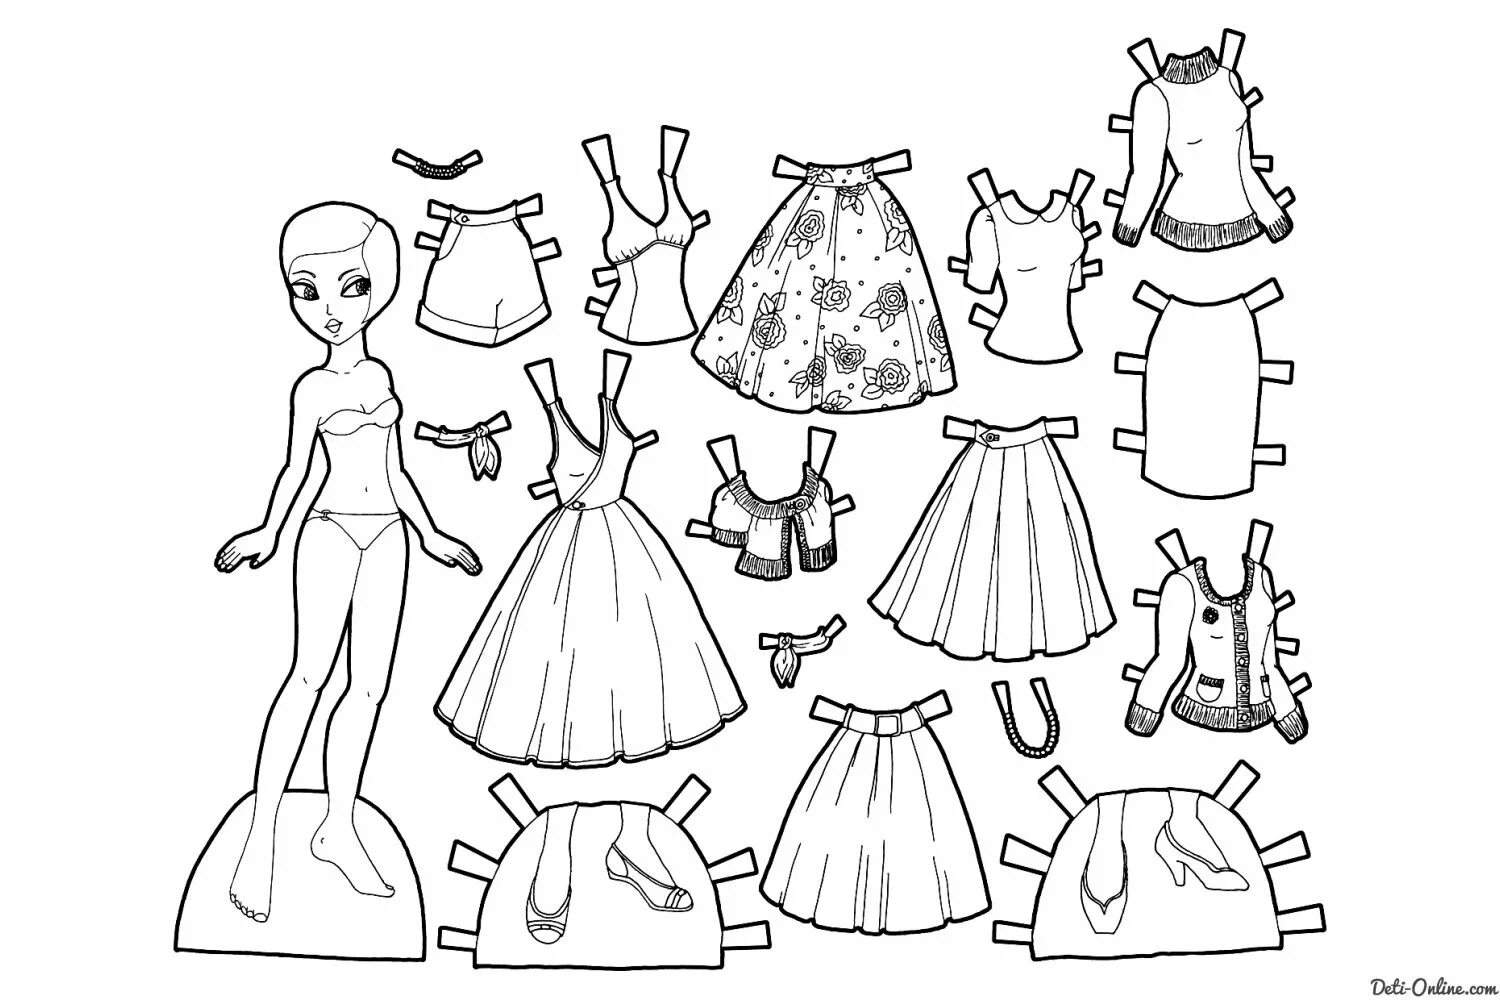 Colored paper dolls with clothes for girls to cut out #4